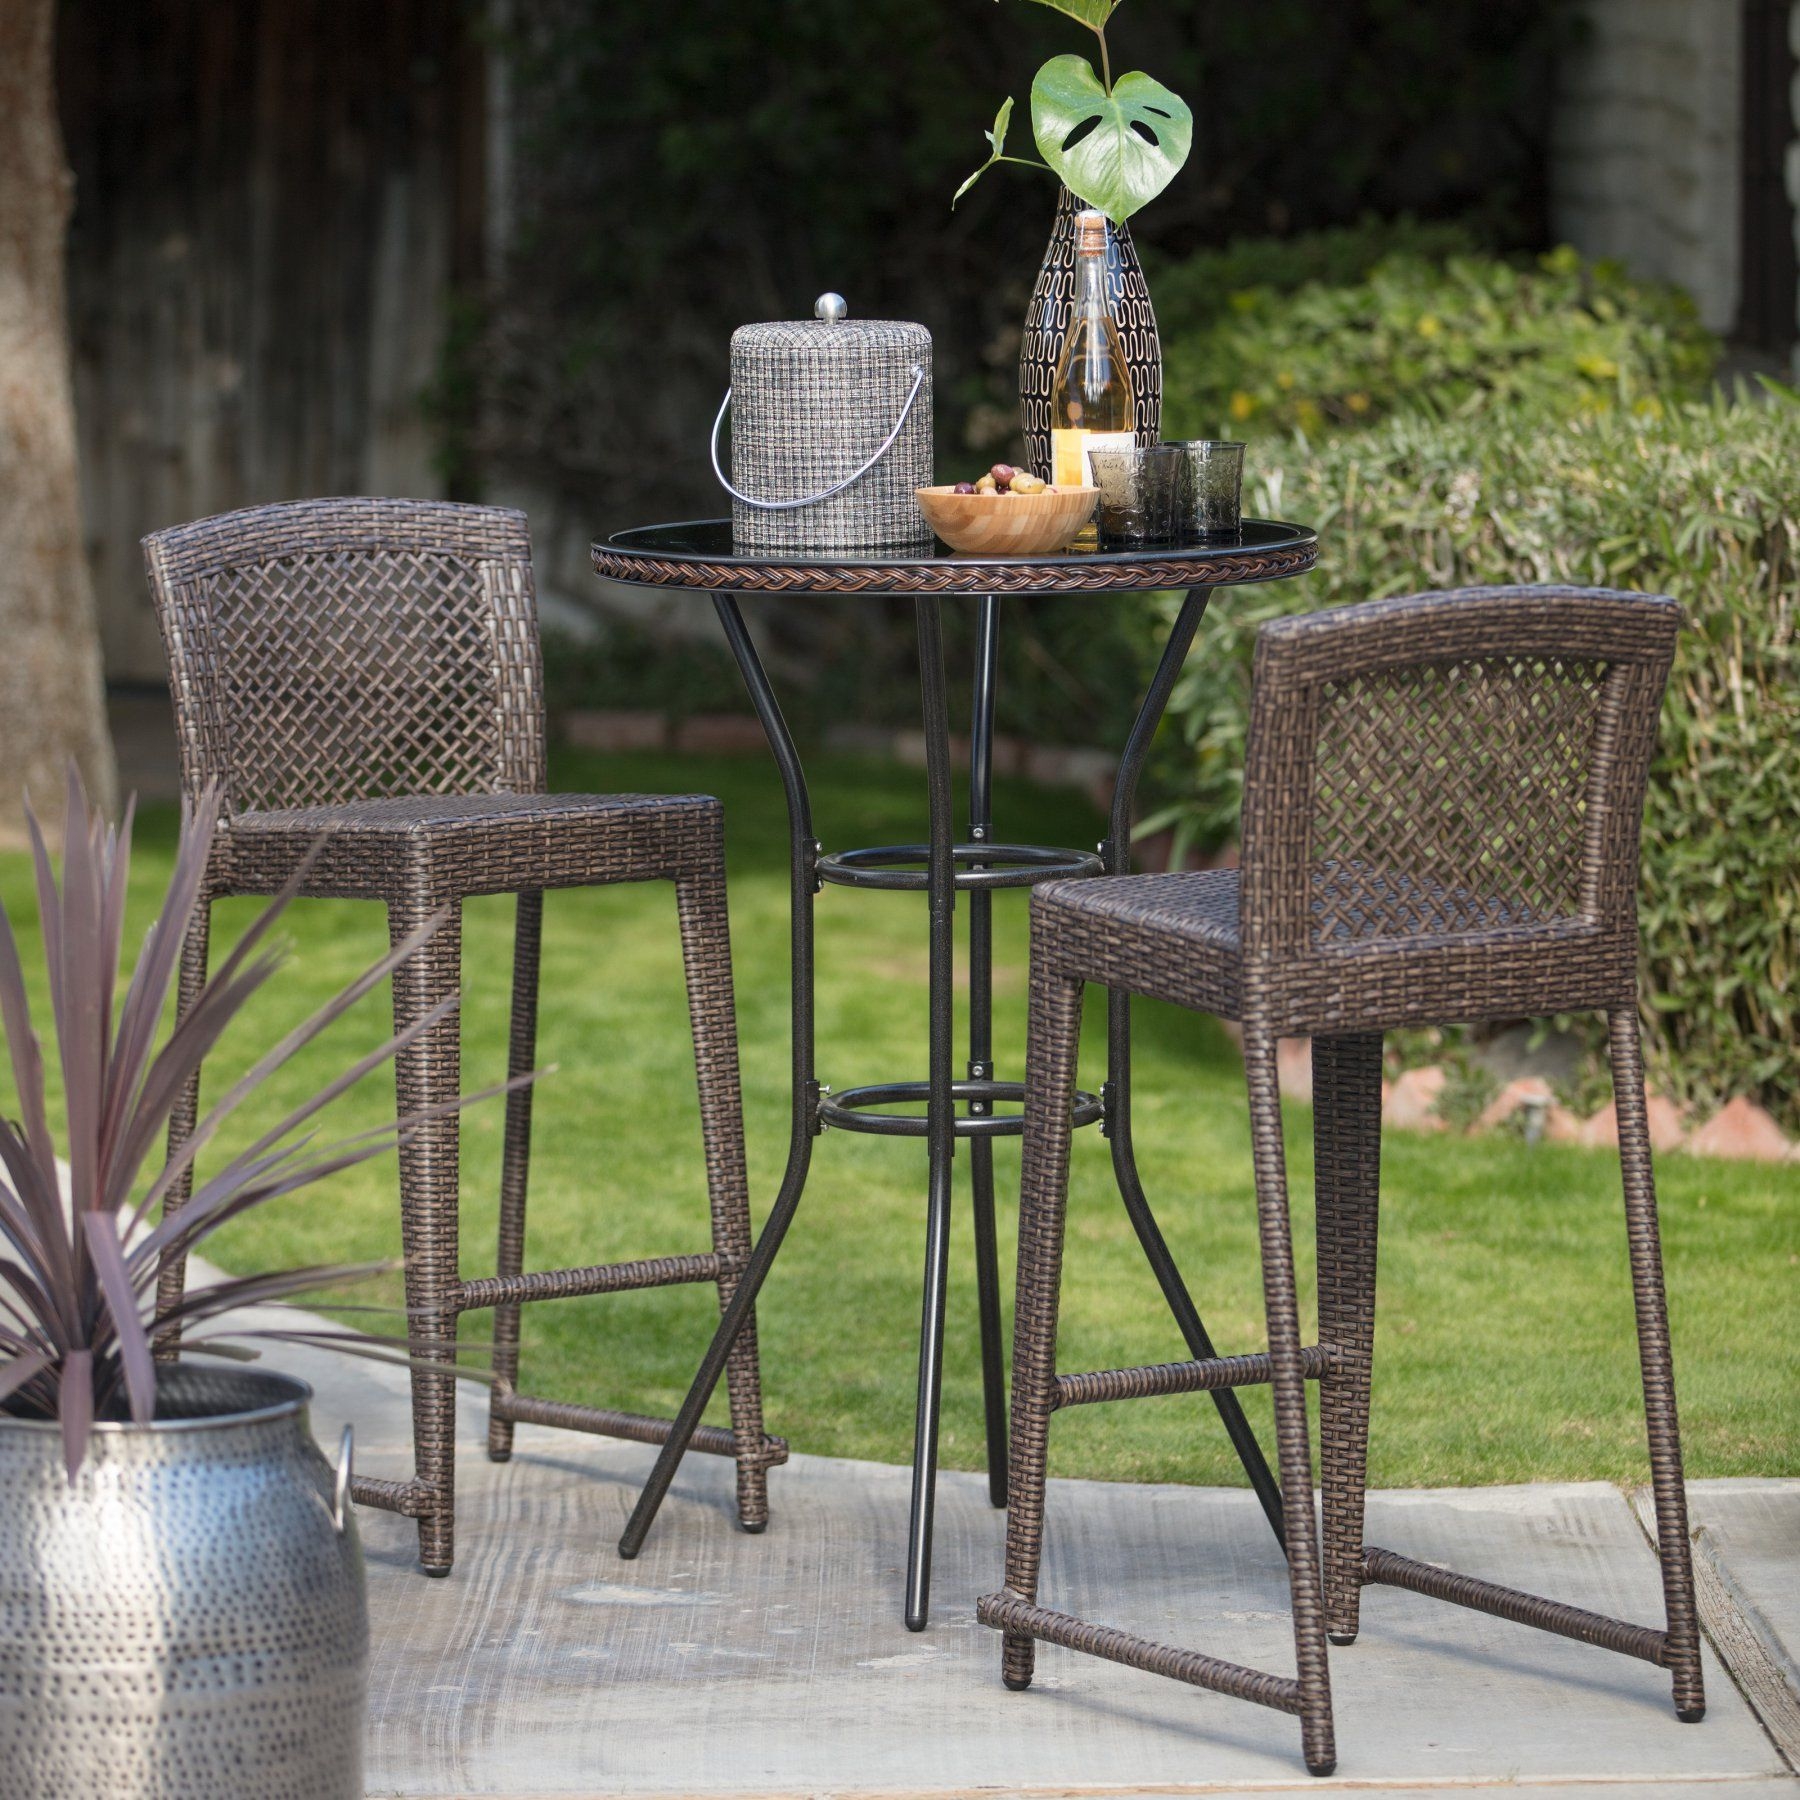 Bar Height Bistro Set Visualhunt, Outdoor Counter Height Bistro Table And Chairs